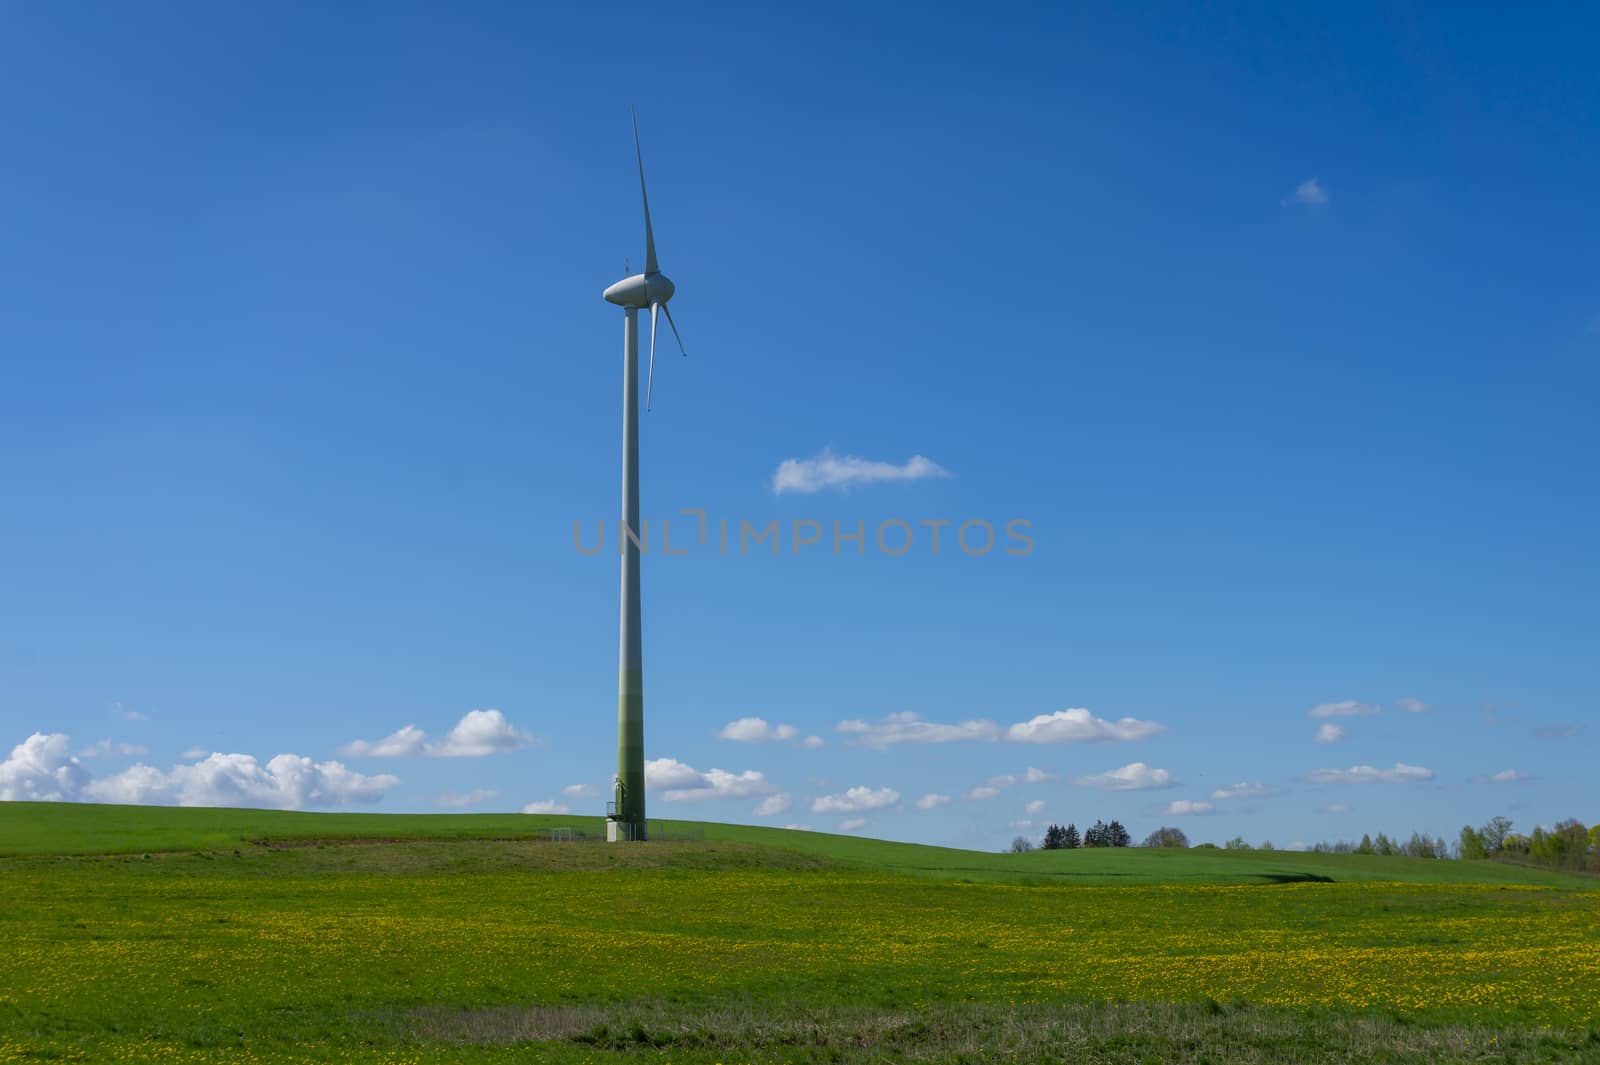 Wind power turbines for electric power generation in landscape with green grass, trees and cloudy blue sky